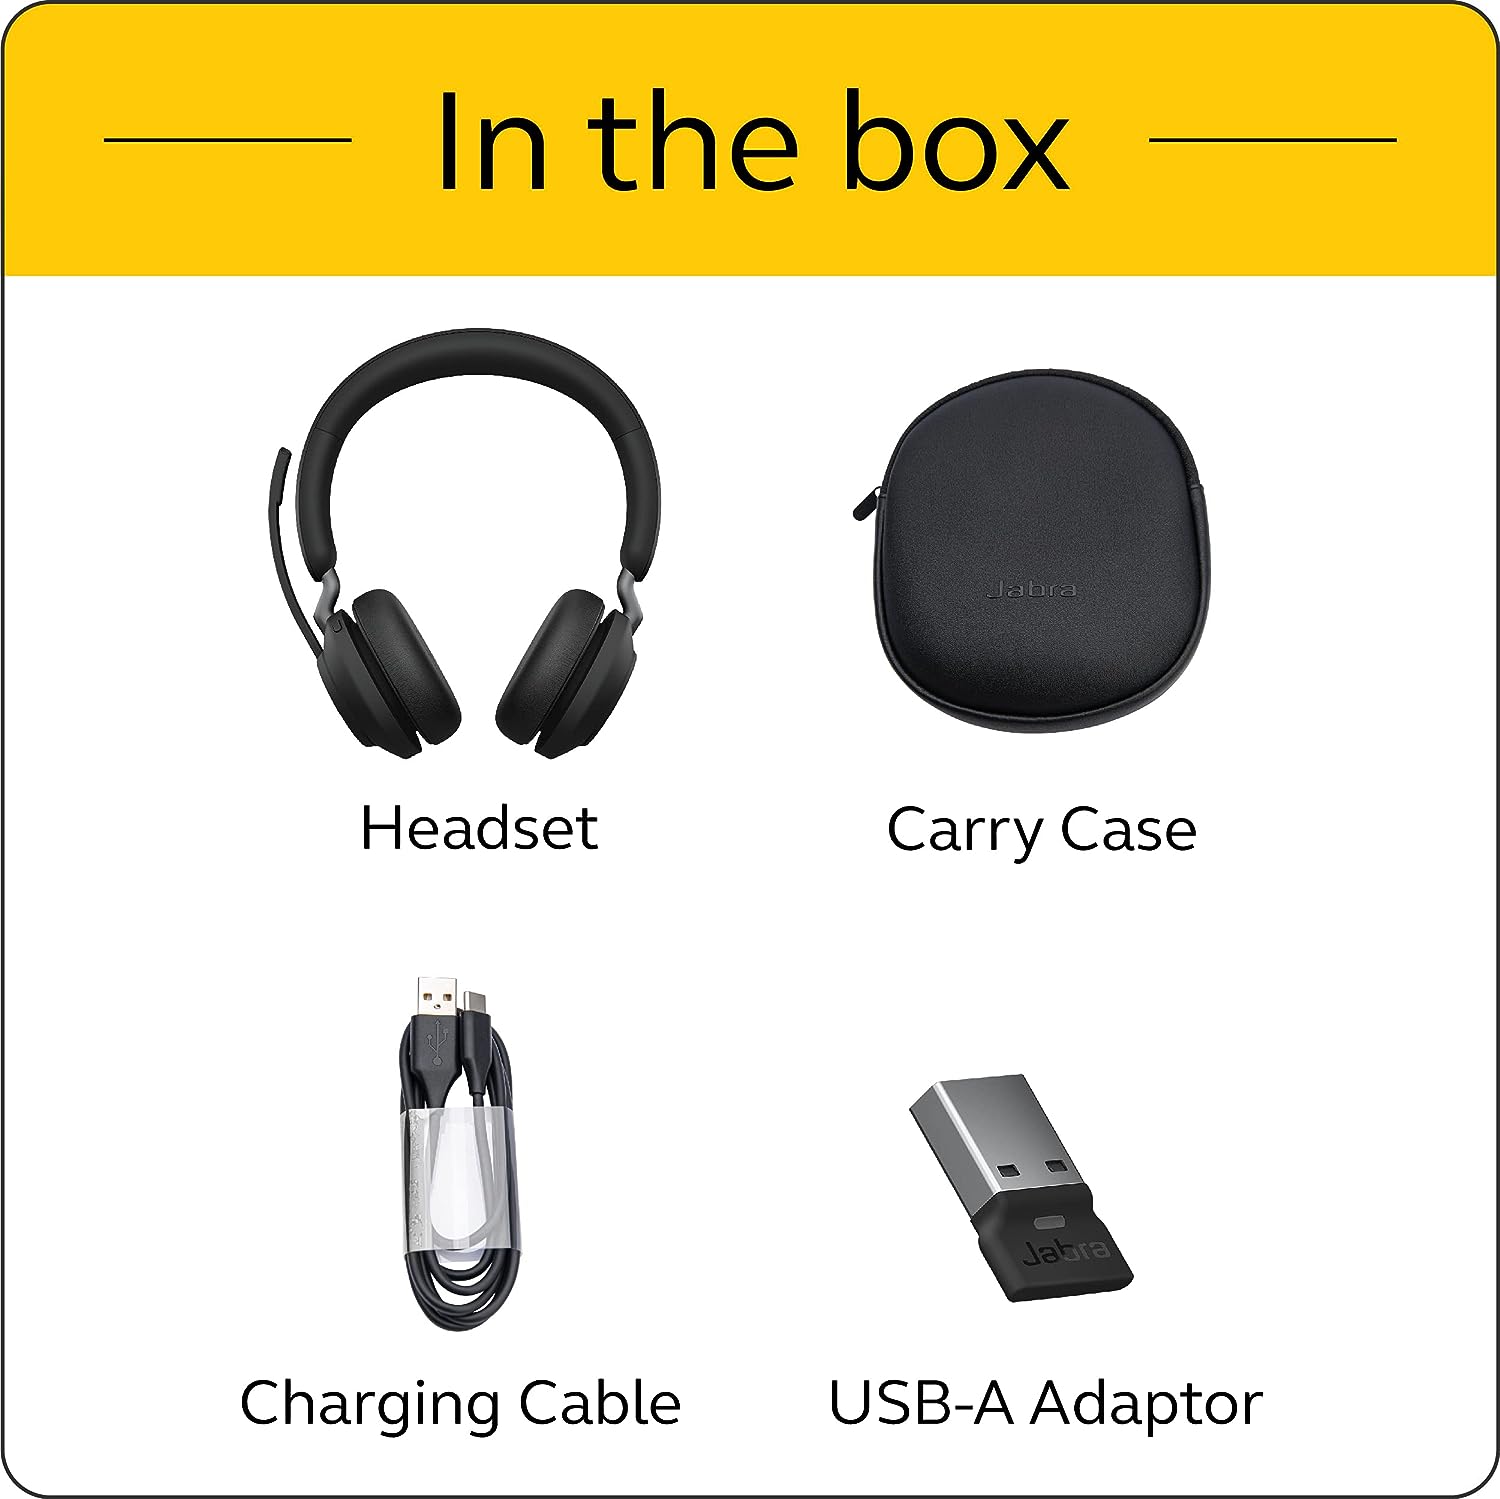 Jabra Evolve2 30 UC Wired Headset, USB-C, Mono, Black – Lightweight,  Portable Telephone Headset with 2 Built-in Microphones – Work Headset with